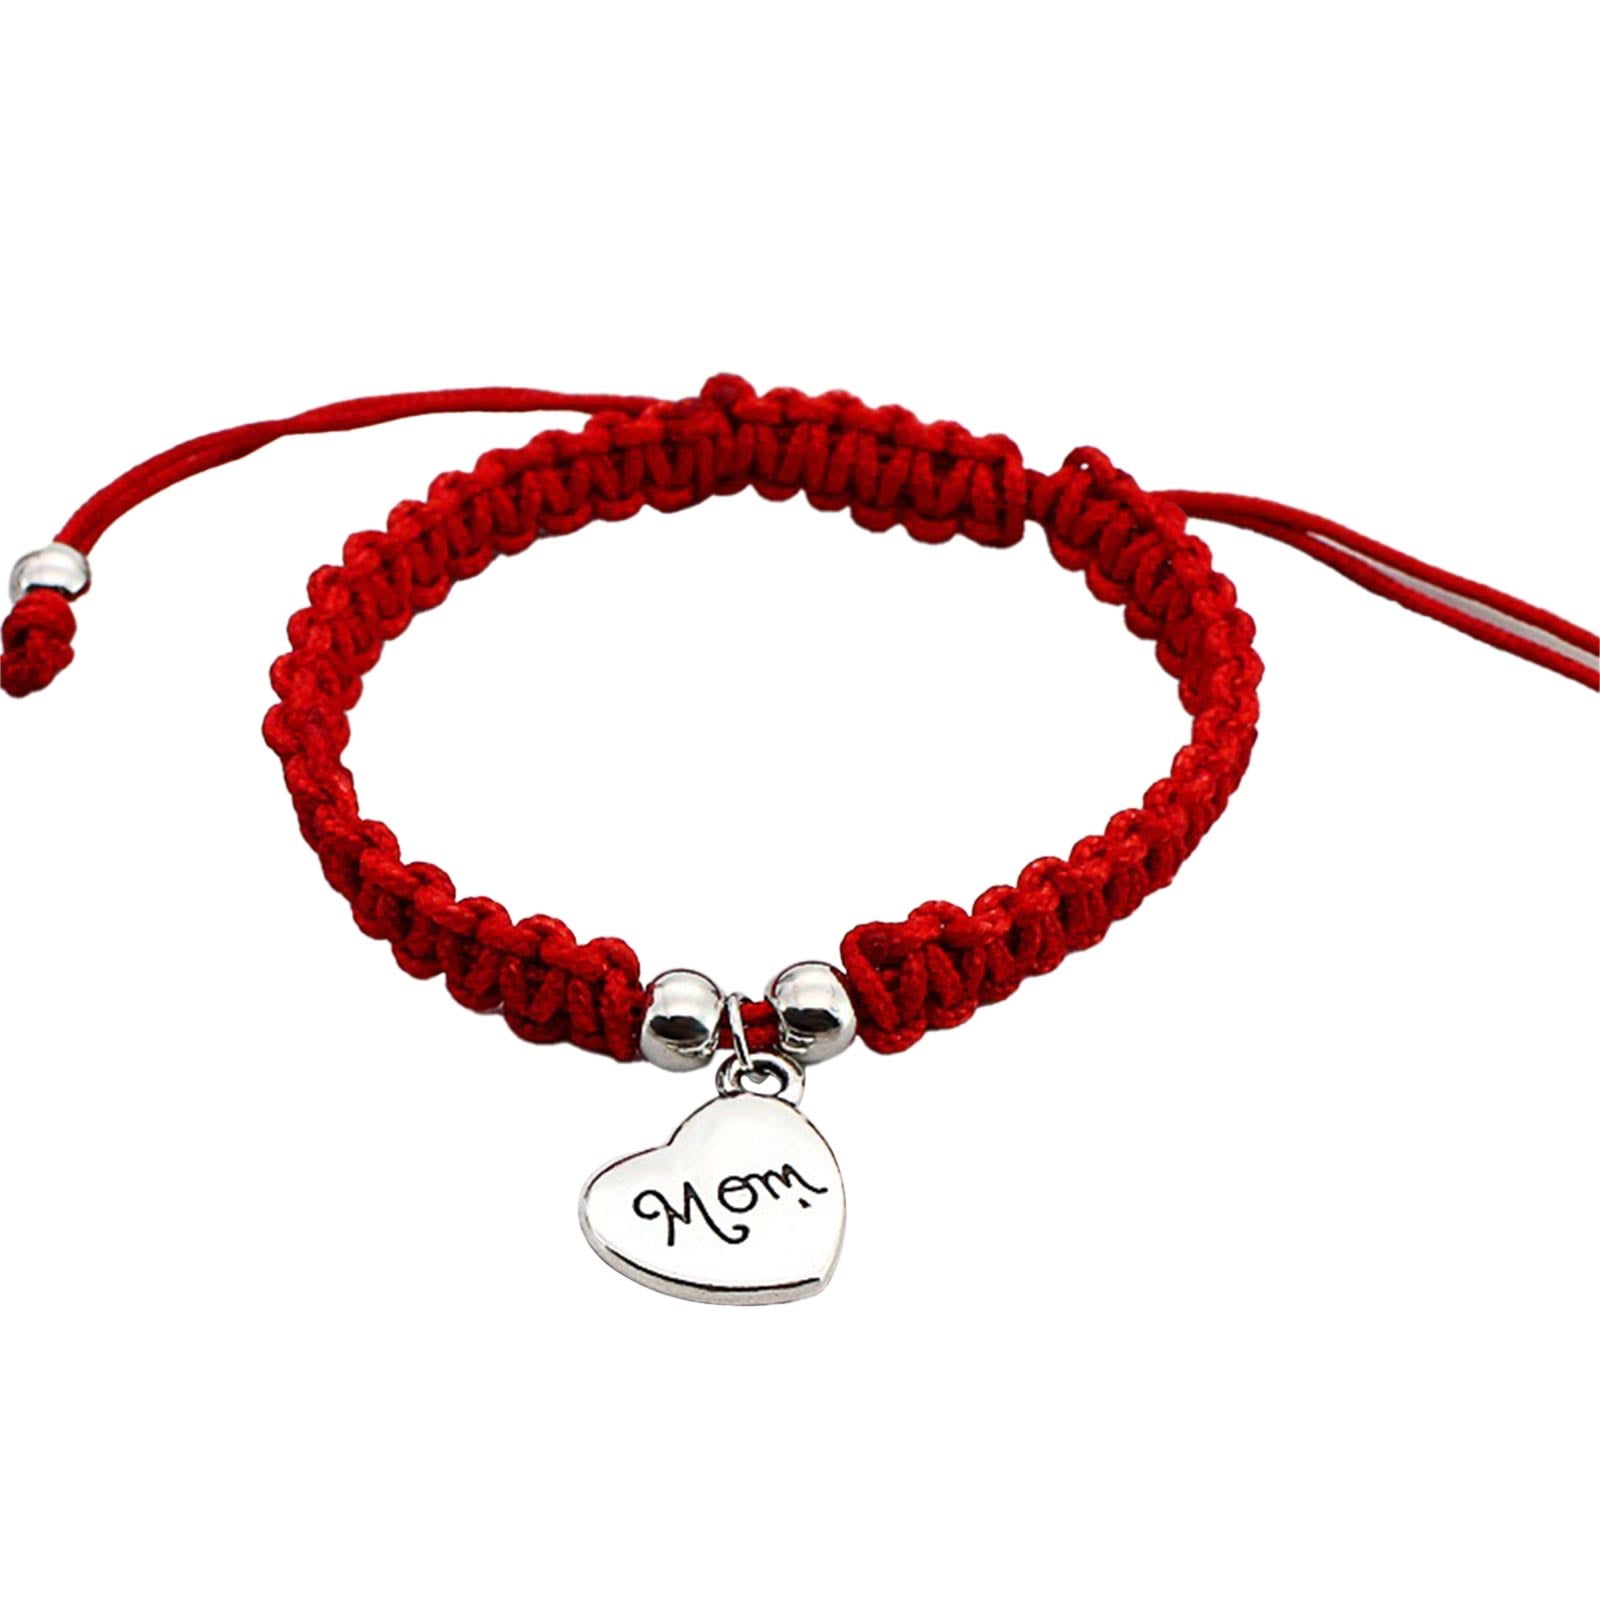 Bracelets in Jewelry Mother's Day Gift Simple Handwoven MOM Bracelet Red  Rope Bracelet Bracelets for Women 